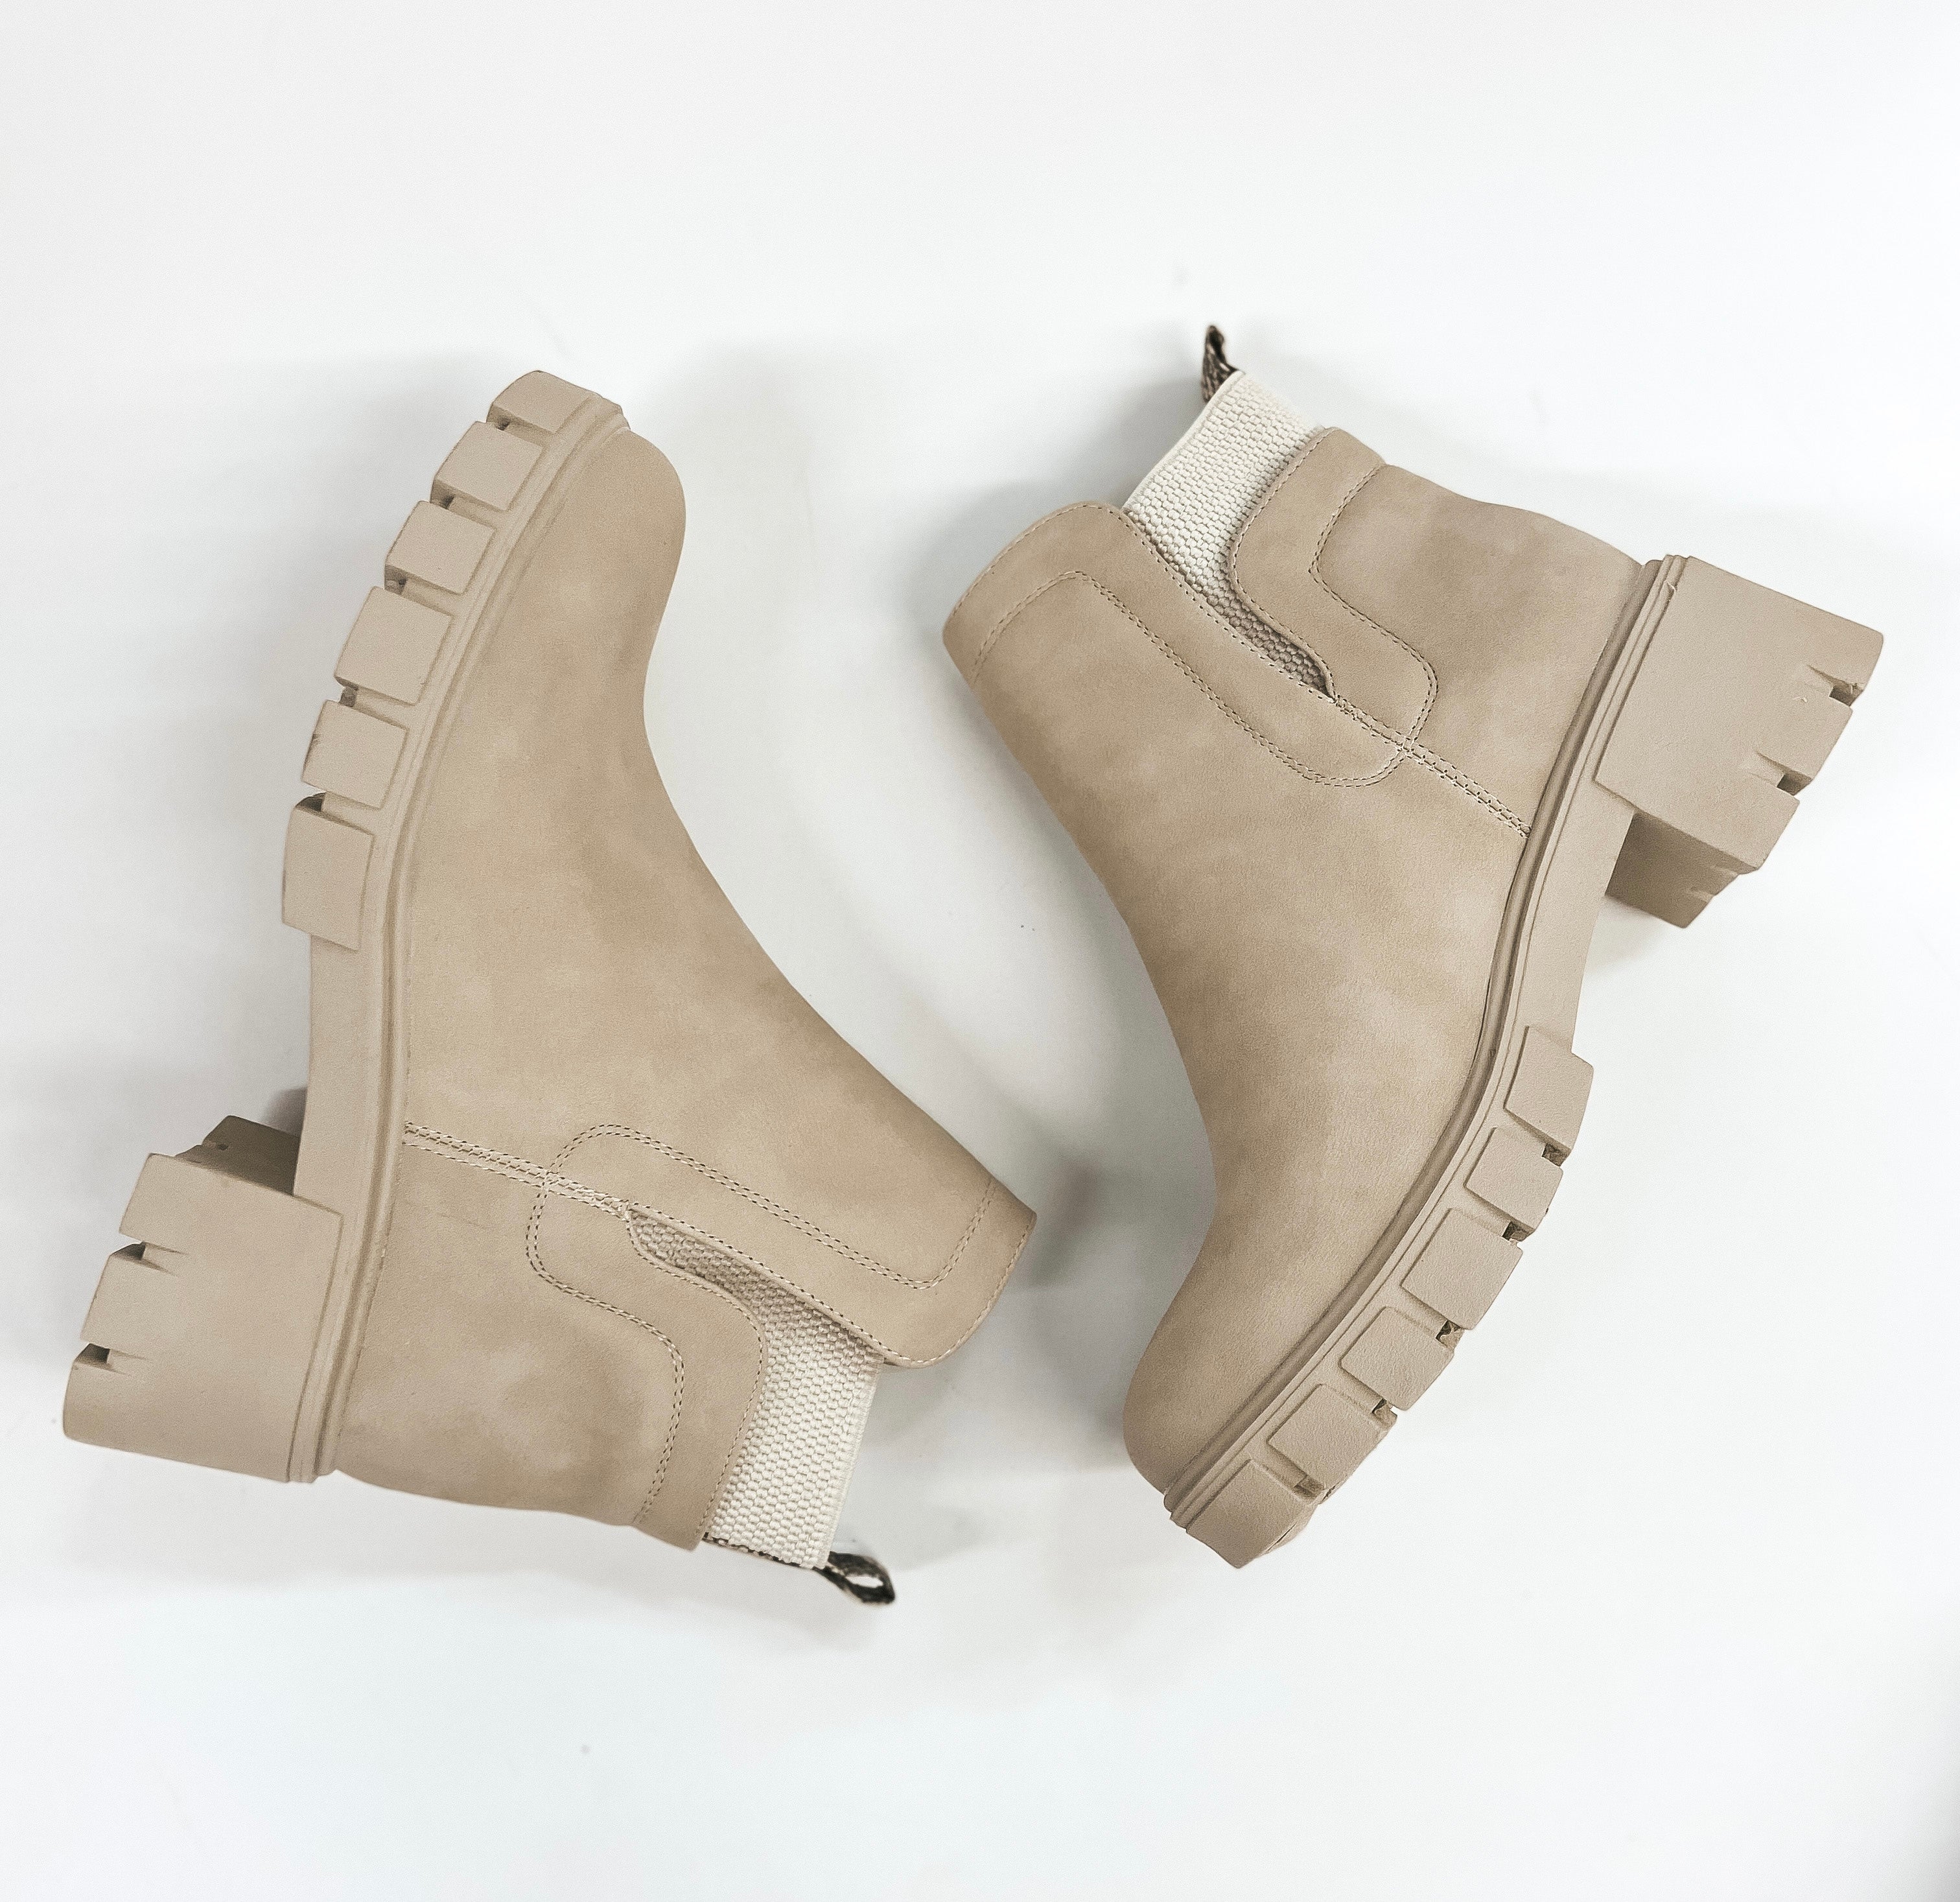 Season Premiere Slip On Chunky Heel Booties in Stone - Giddy Up Glamour Boutique